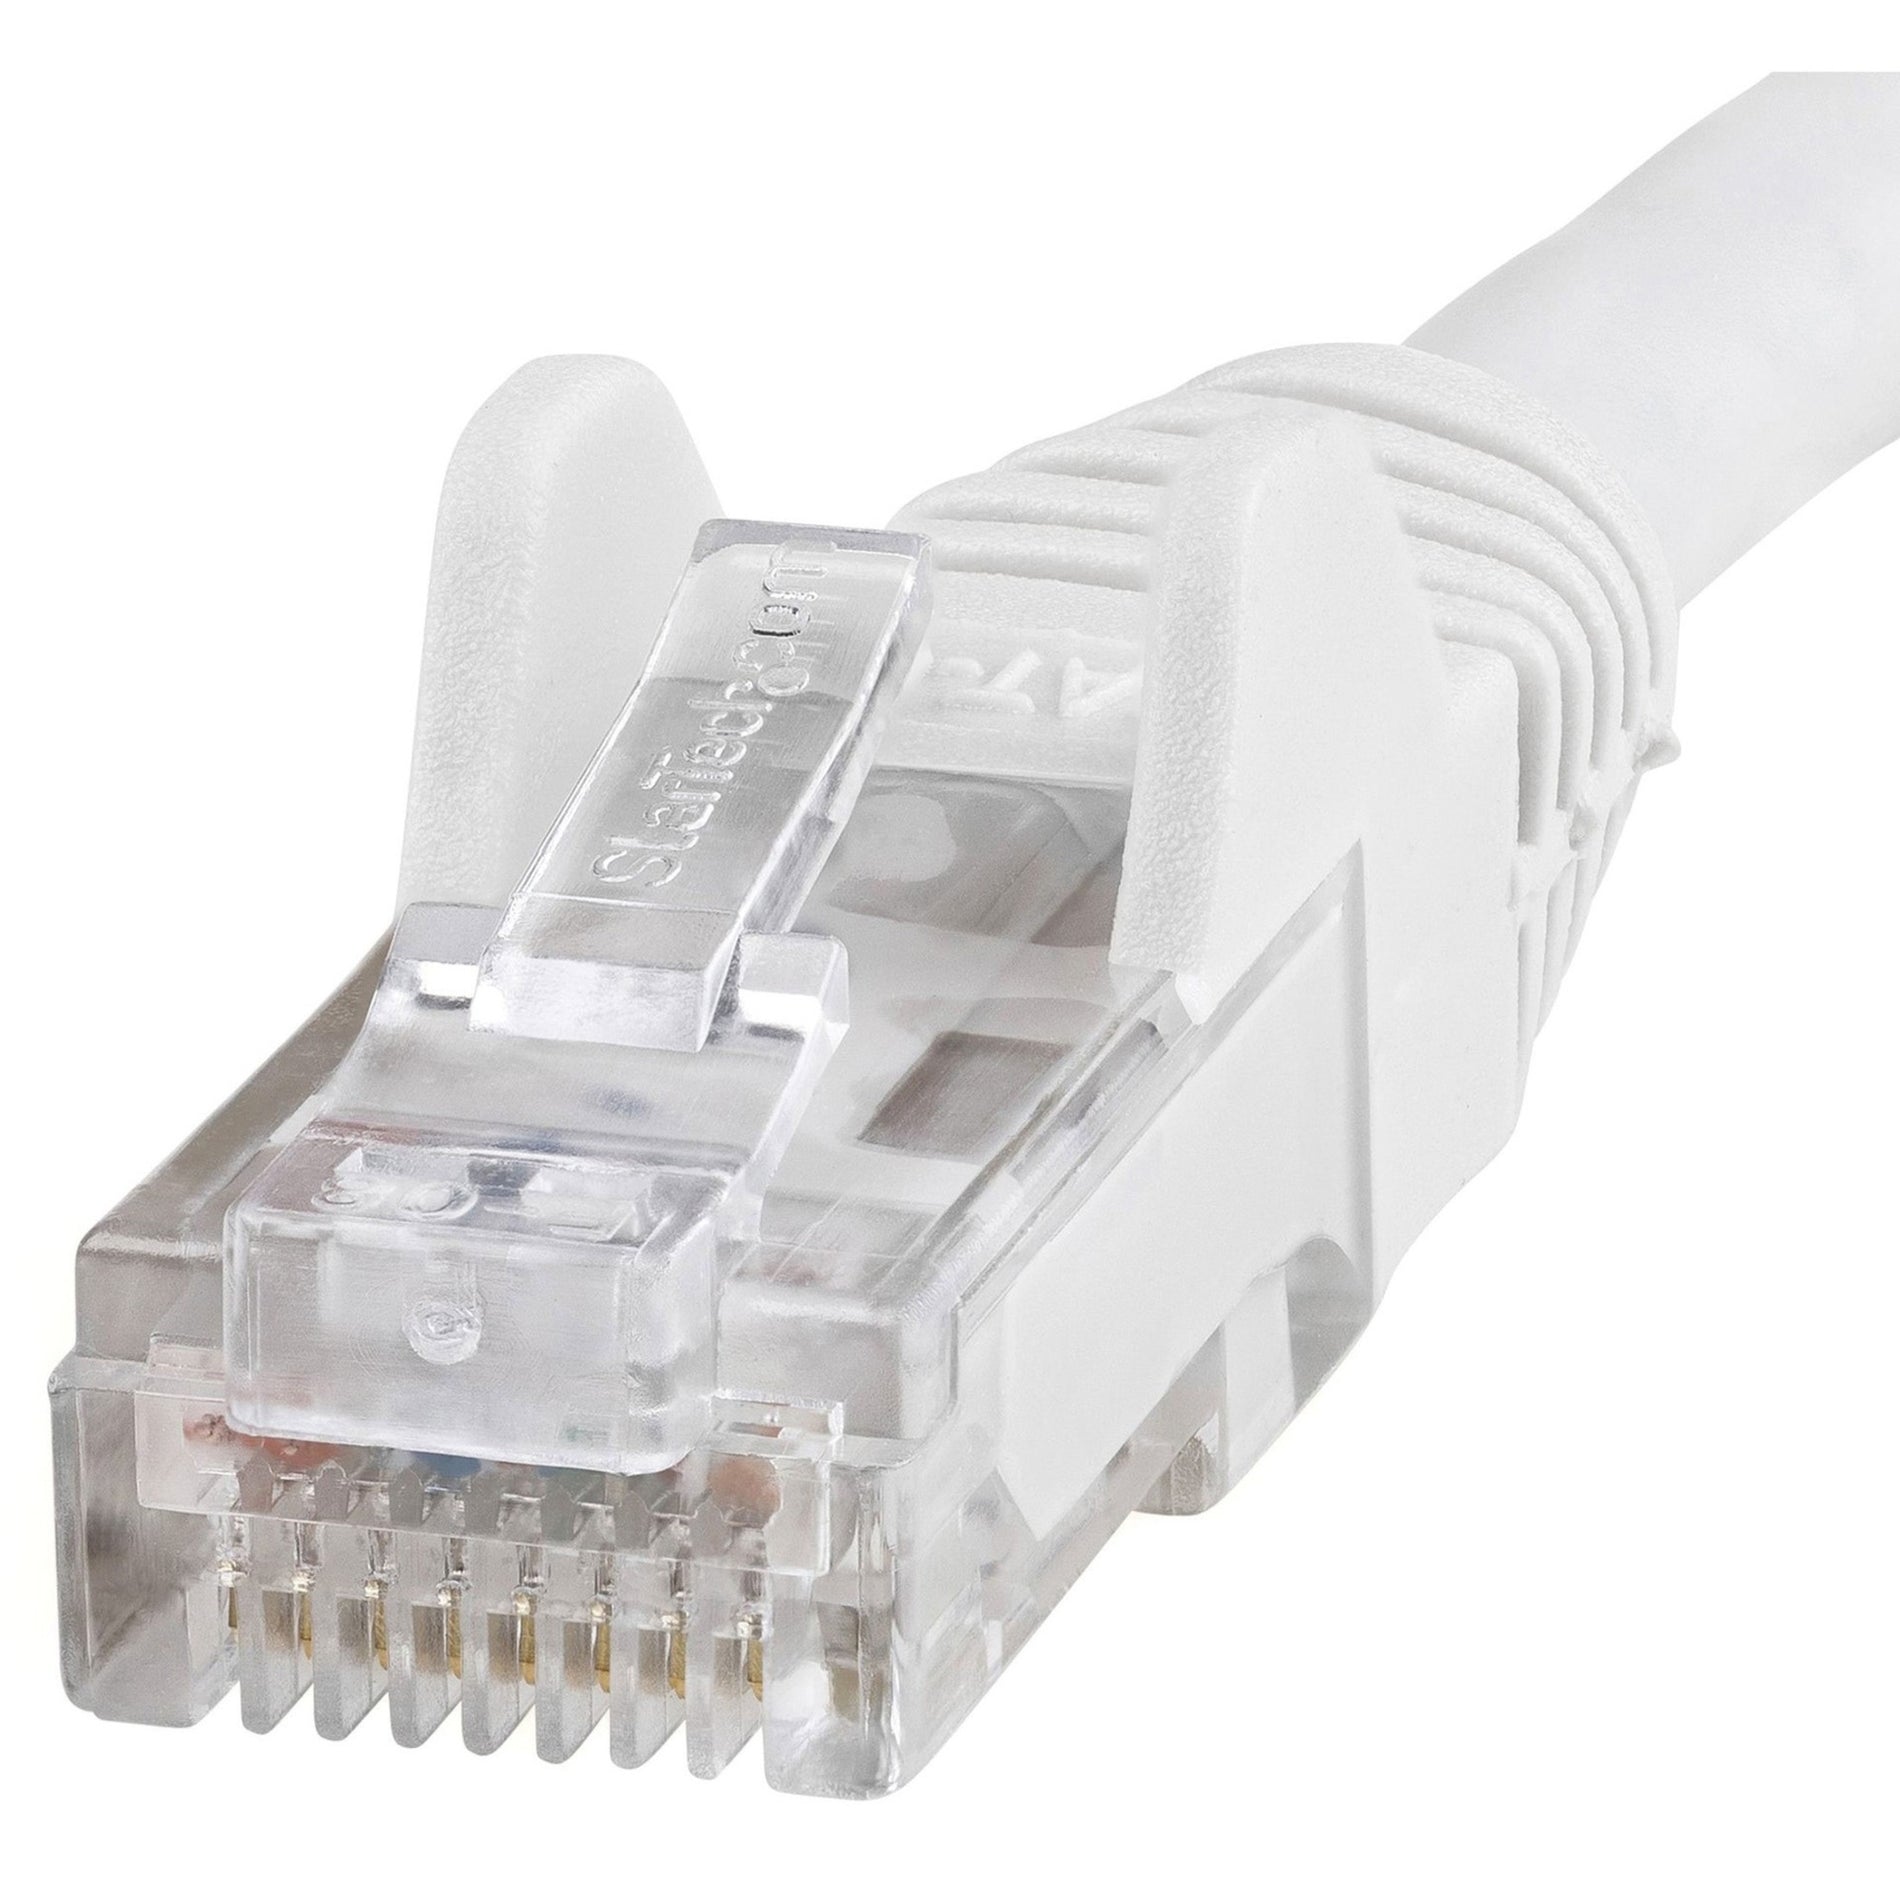 StarTech.com N6PATCH12WH Cat6 Patch Cable, 12ft White Ethernet Cable, Snagless RJ45 Connectors